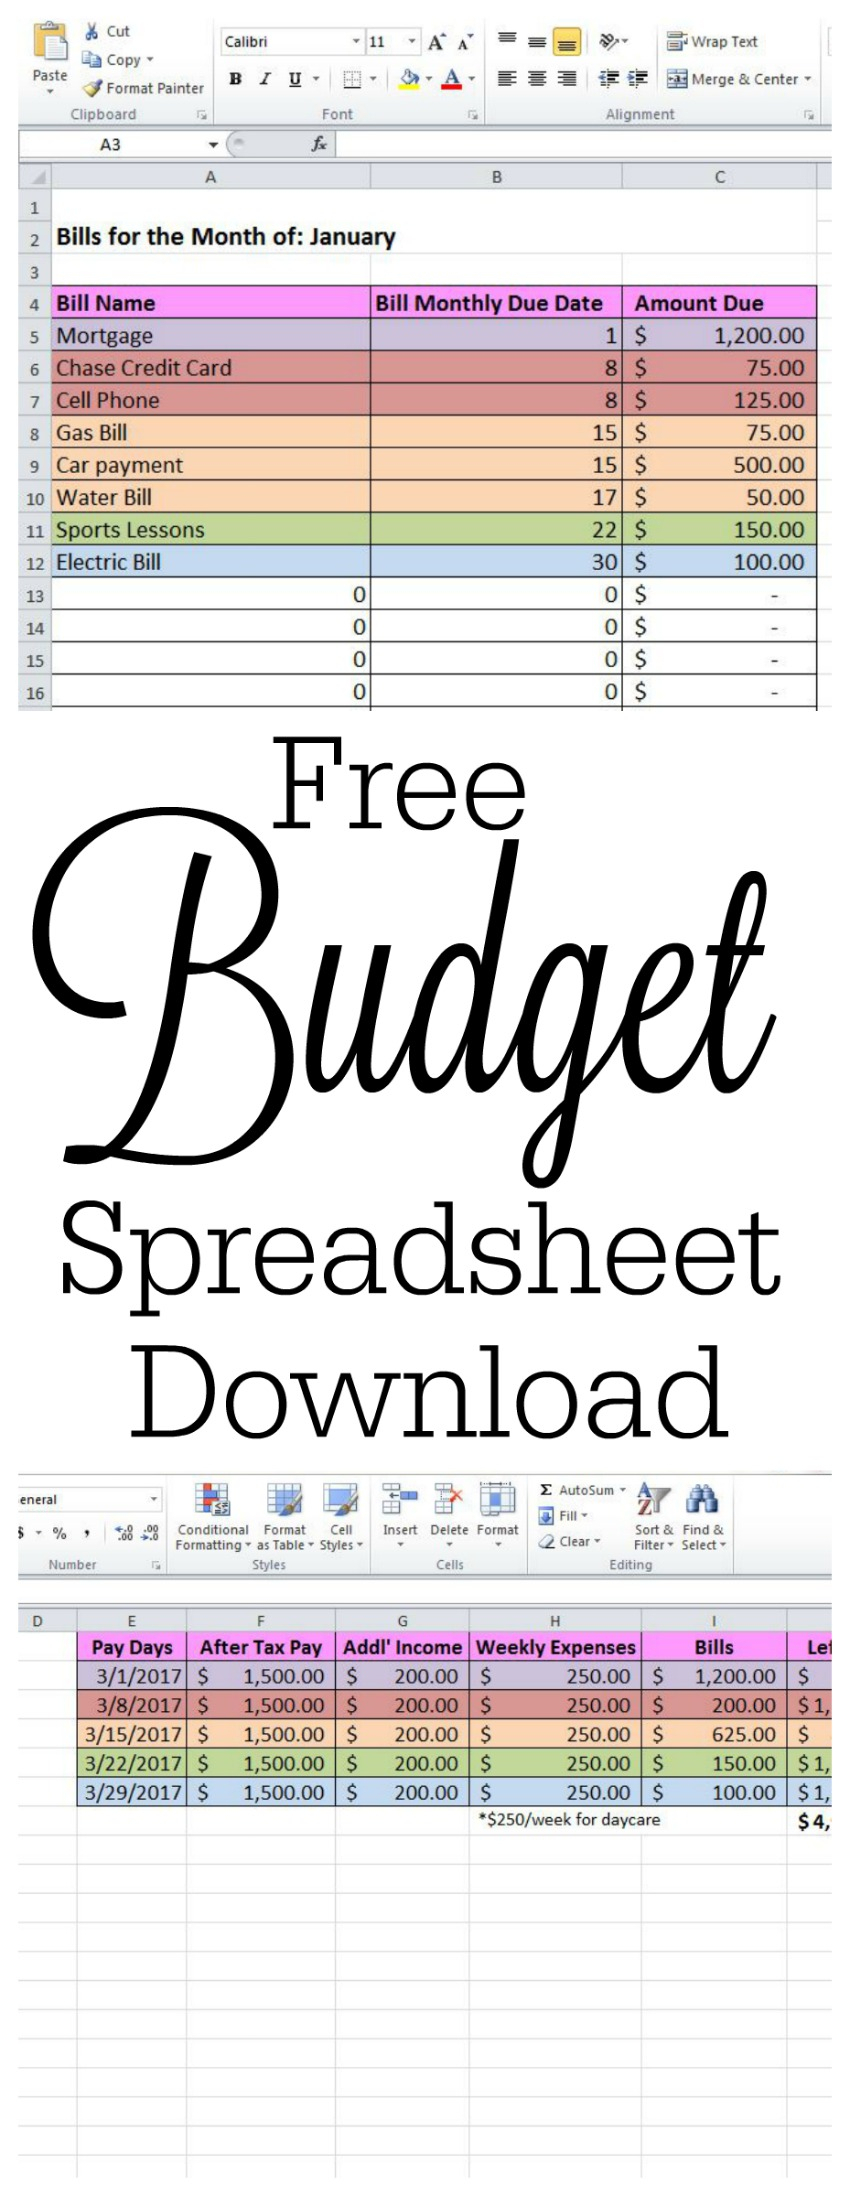 Spreadsheet To Keep Track Of Bills For Free Budget Spreadsheet And How To Keep Track Of Passwords  The